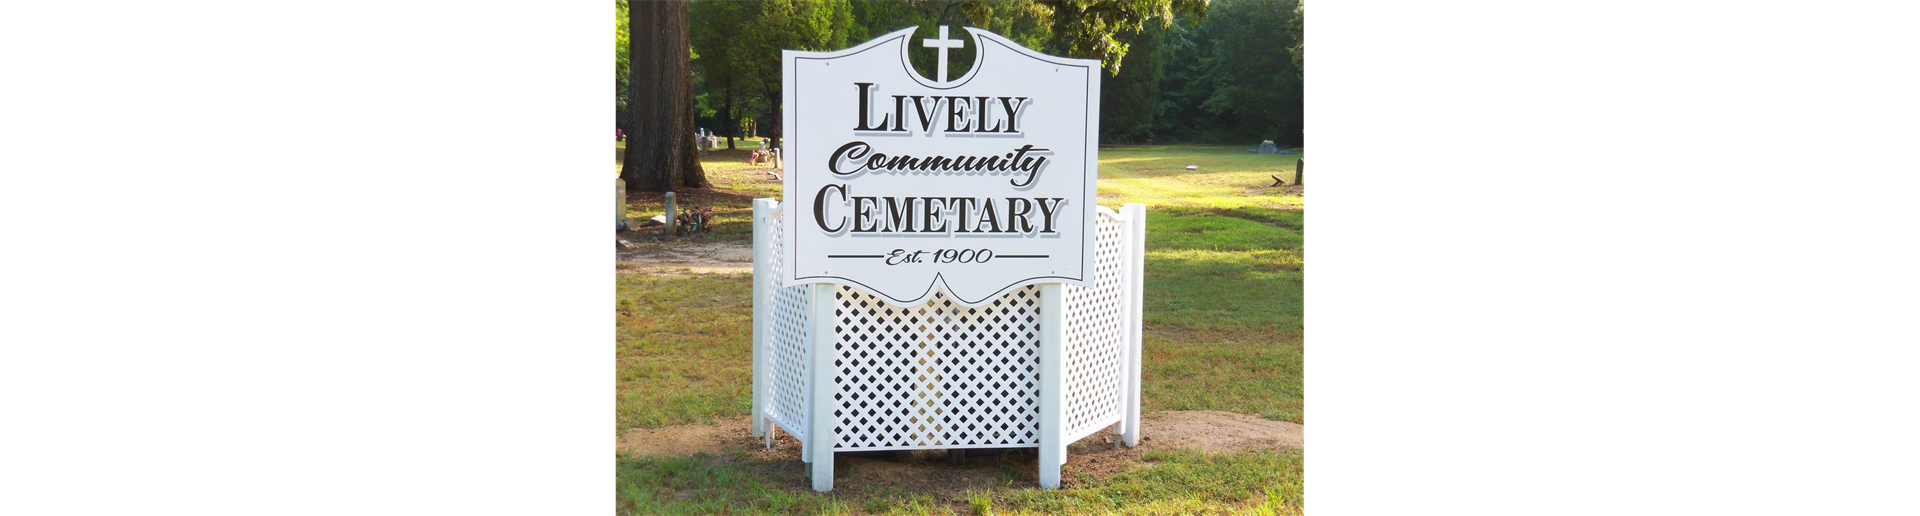 CPAL Clean Up at Lively Community Cemetery